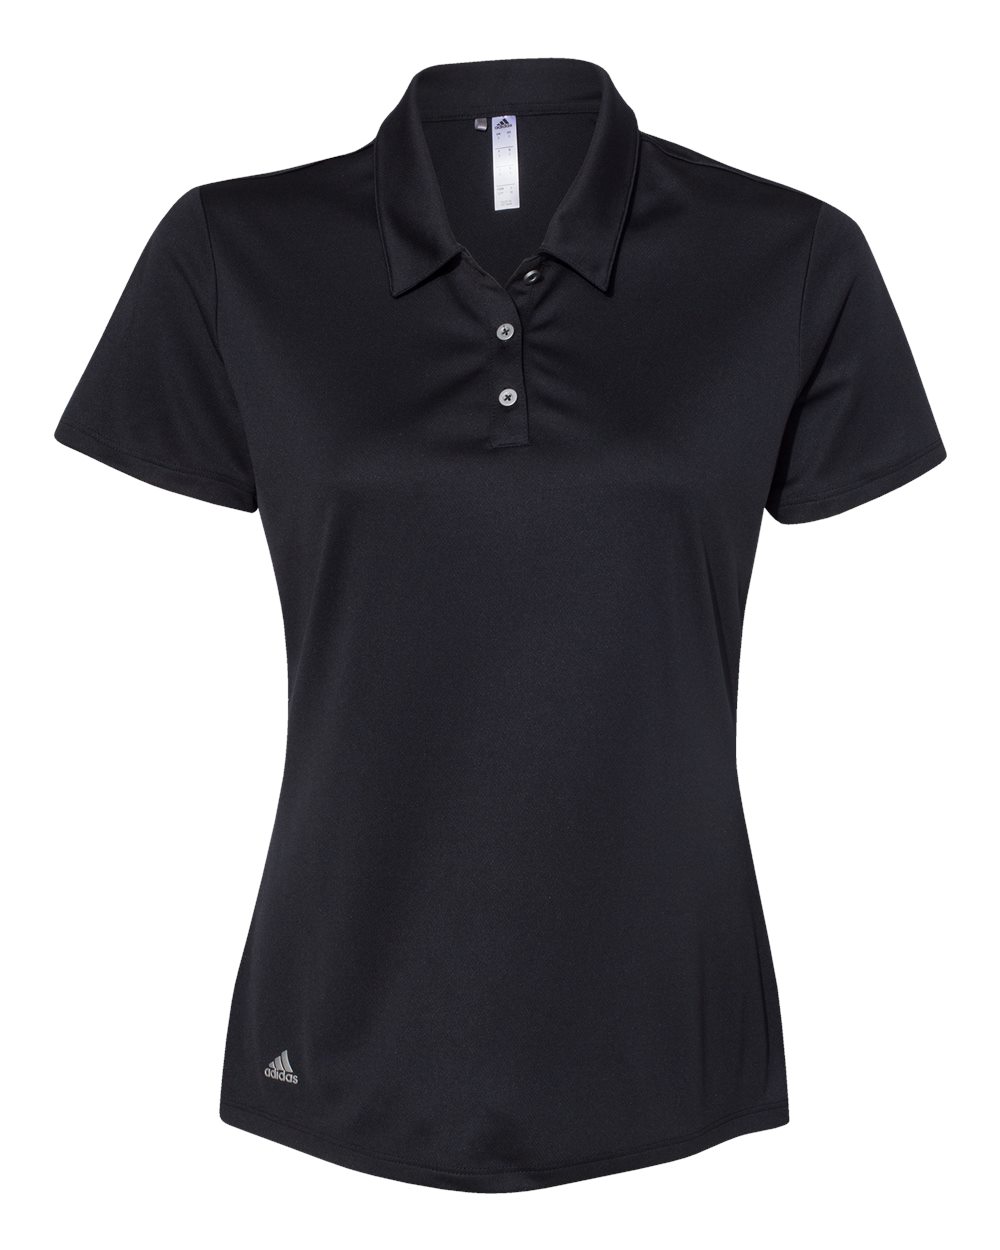 Picture of Adidas - Women's Performance Polo